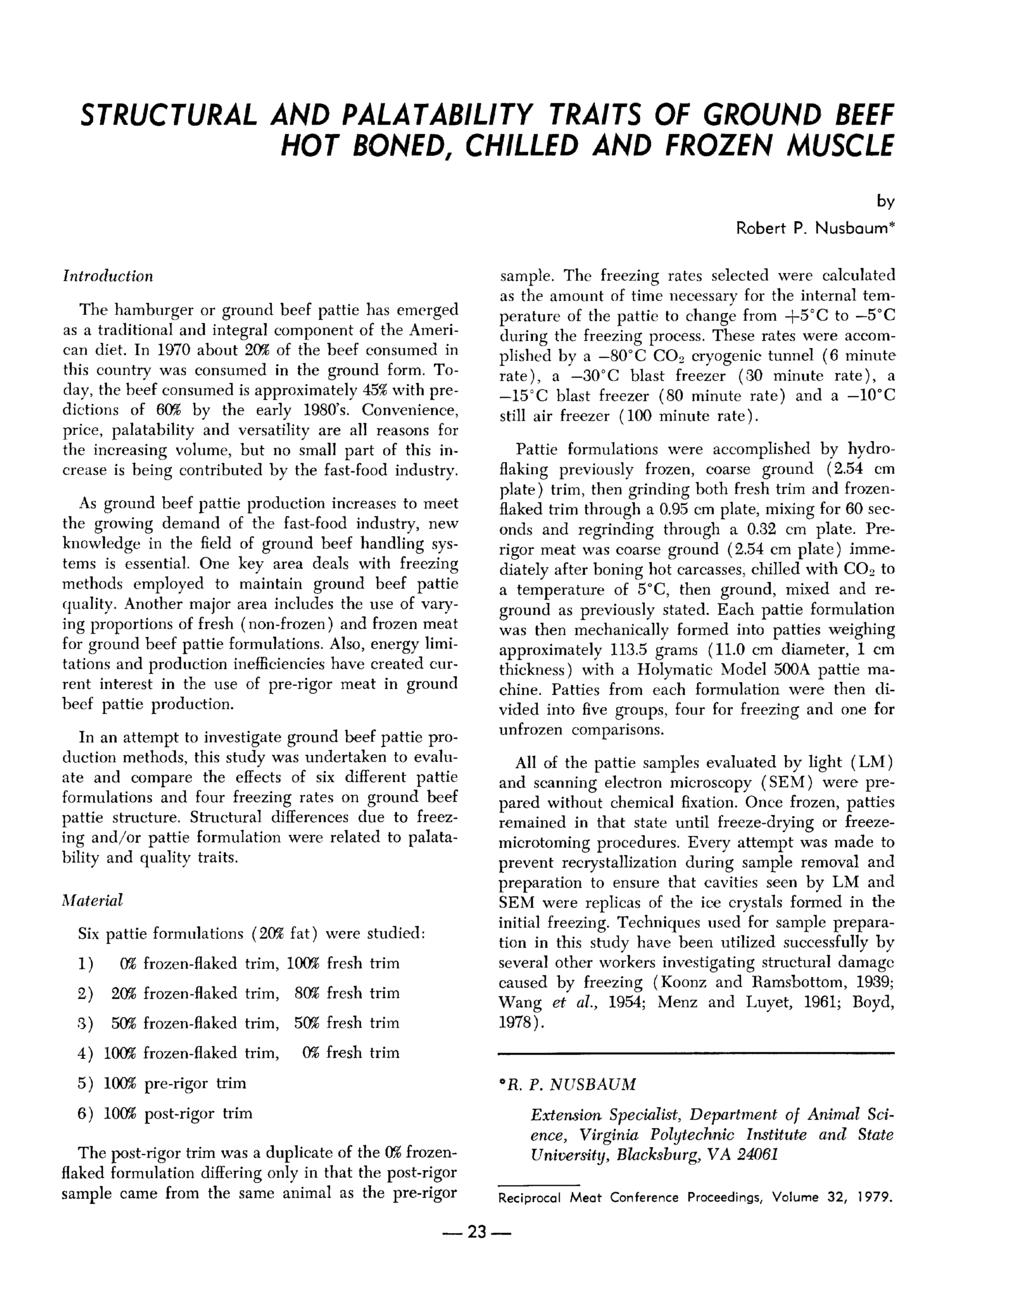 STRUCTURAL AND PALATABILITY TRAITS OF GROUND BEEF HOT BONED, CHILLED AND FROZEN MUSCLE by Robert P. Nusbaum* Introduction sample.